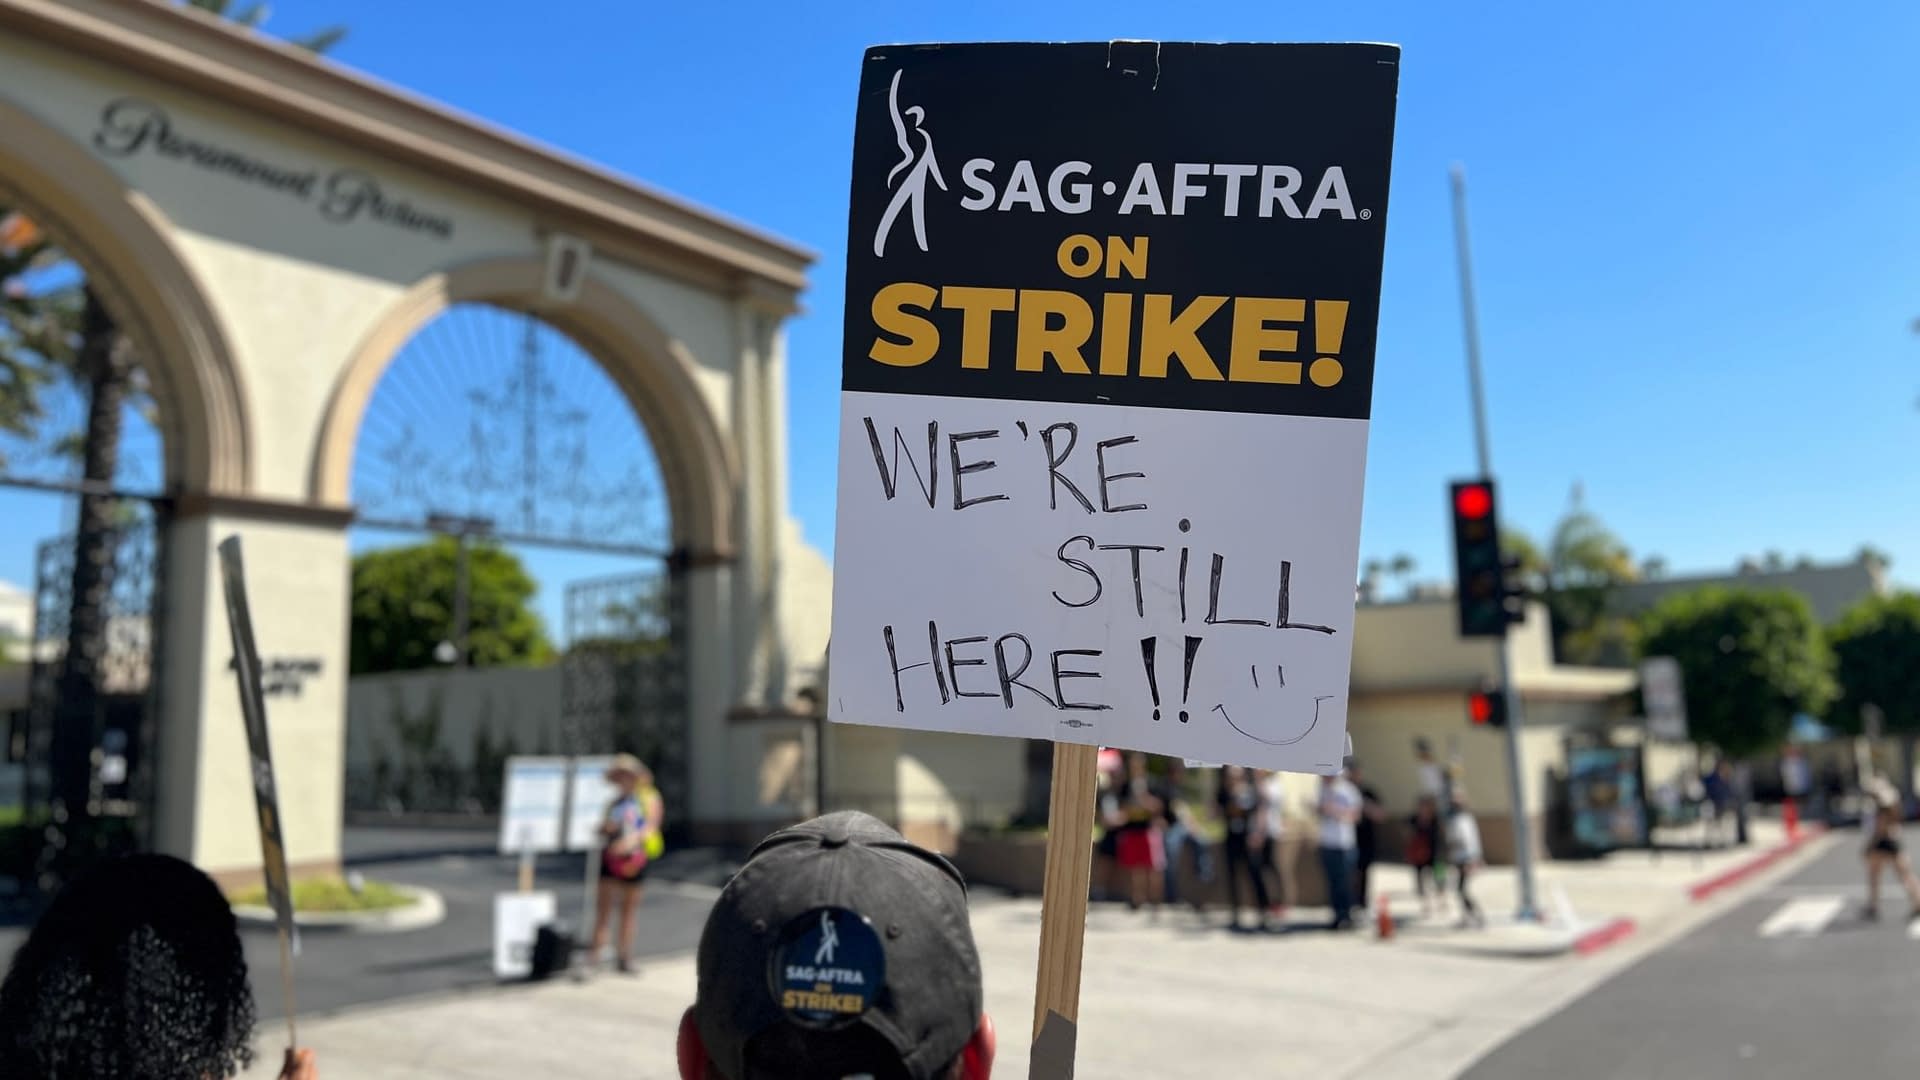 Actors' Strike Continues: Here's What's Holding Up Negotiations